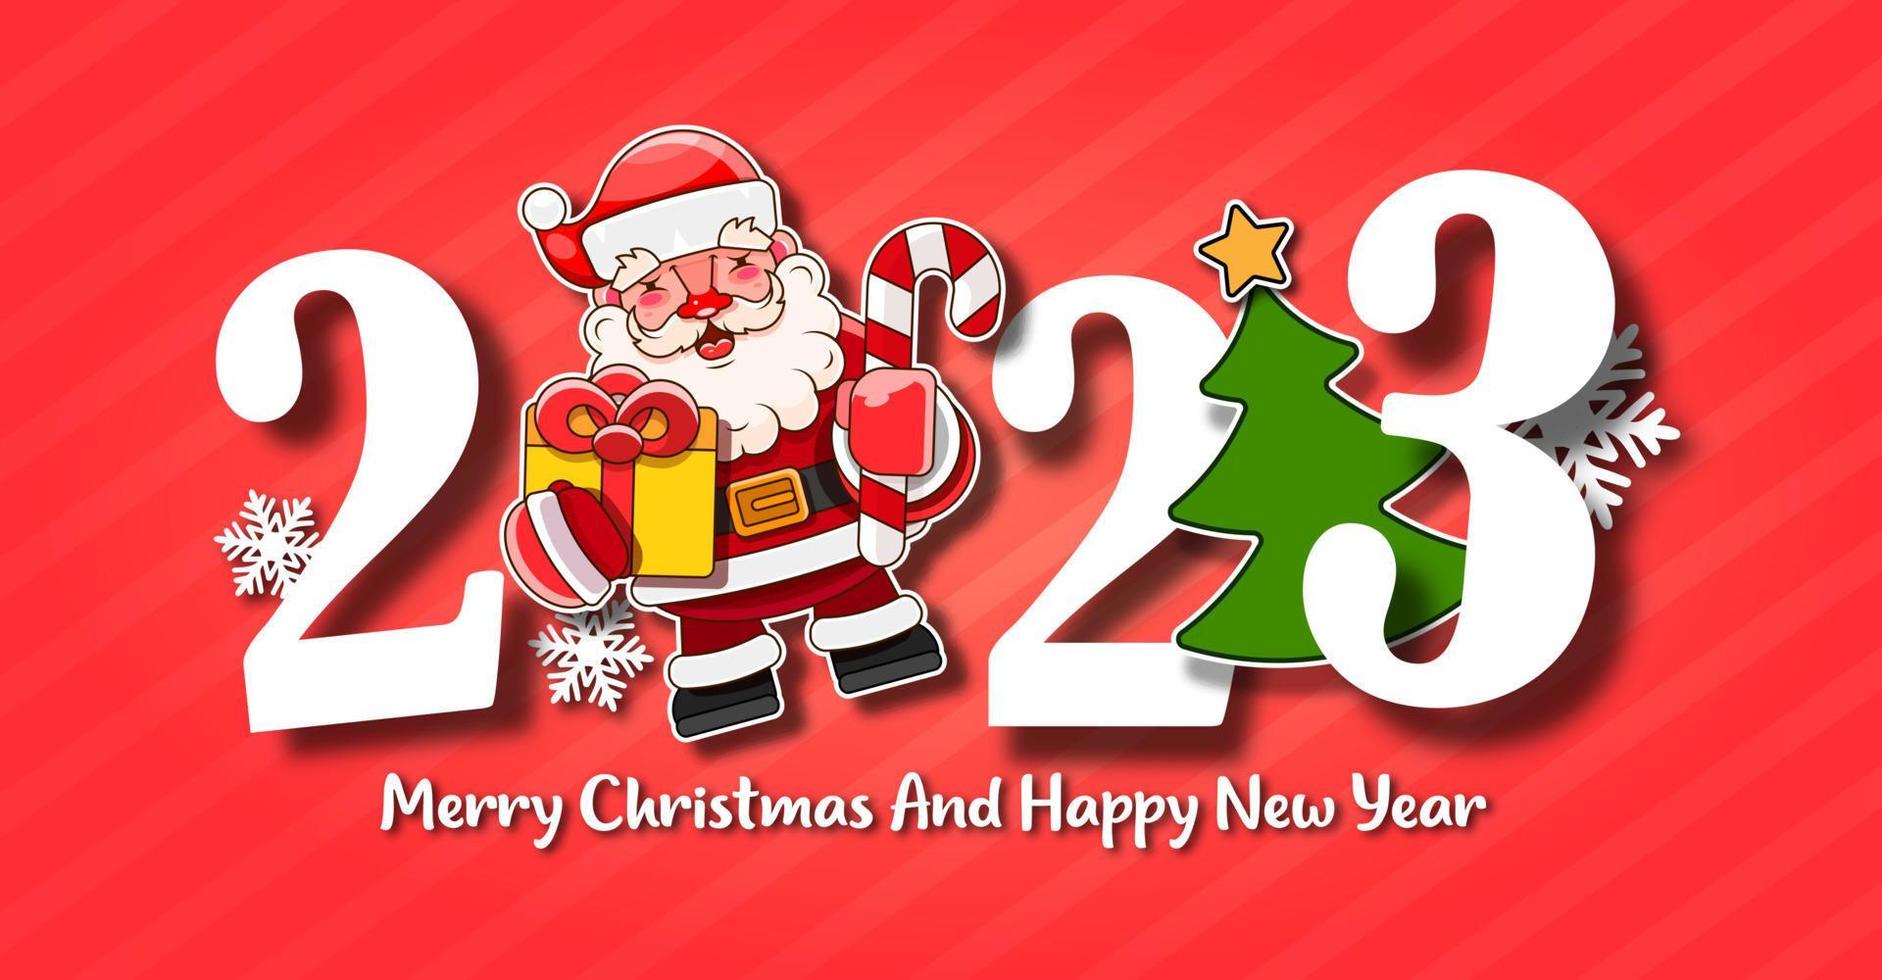 I Wish You A Merry Christmas And Happy New Year Vintage Background With Typography. 2023 vector